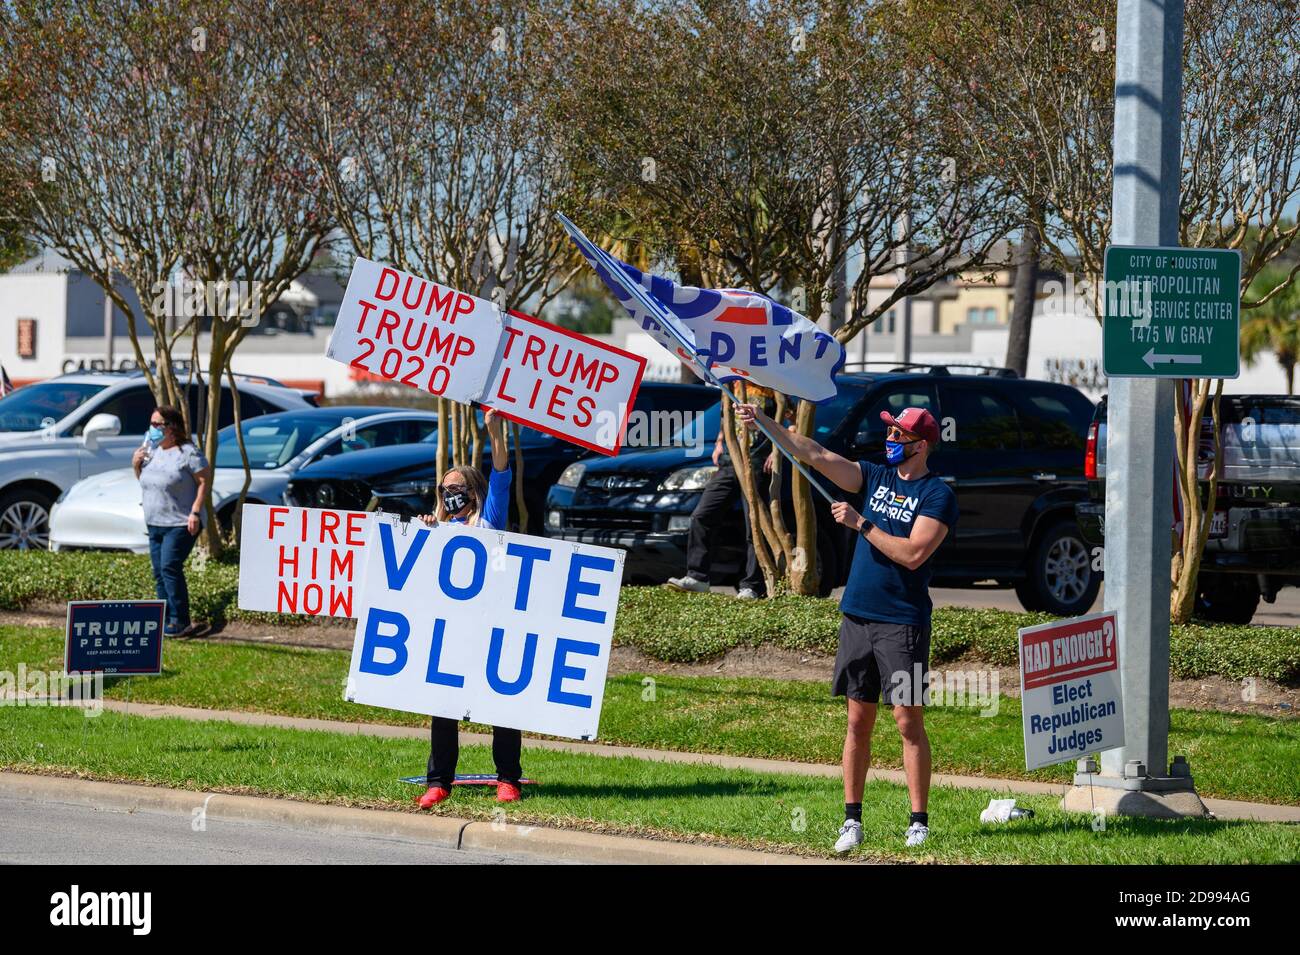 Houston, Texas, USA. 3rd Nov, 2020. A volunteer holds signs VOTE BLUE, DUMP TRUMP, TRUMP LIES outside a polling station in Harris County, Houston, Texas, USA. Credit: Michelmond/Alamy Live News. Stock Photo